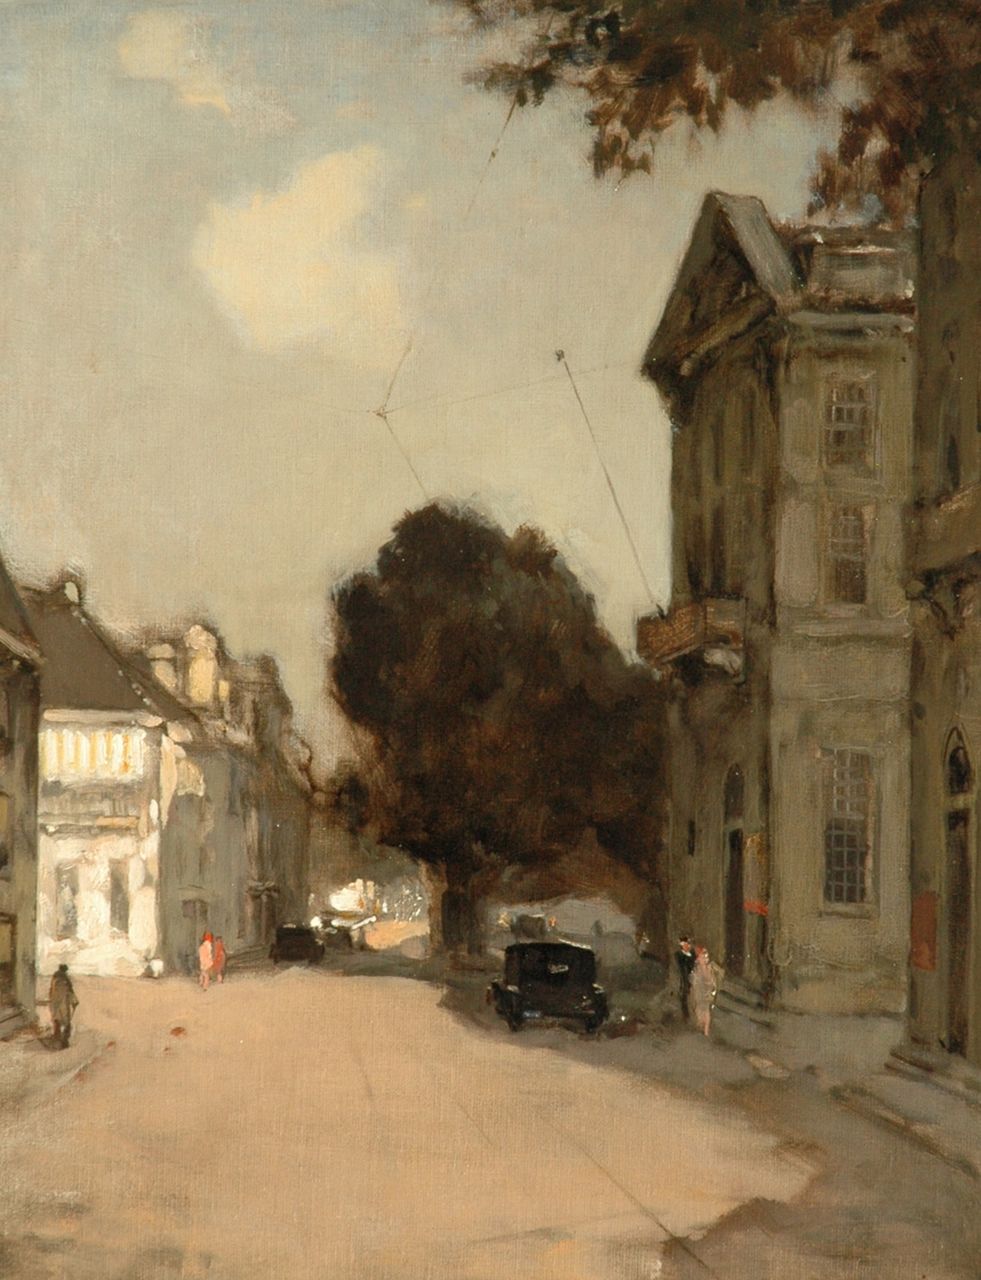 Wenning IJ.H.  | IJpe Heerke 'Ype' Wenning, The Korte Voorhout, The Hague, with the Royal Theatre, Öl auf Leinwand 50,5 x 40,5 cm, signed l.r.